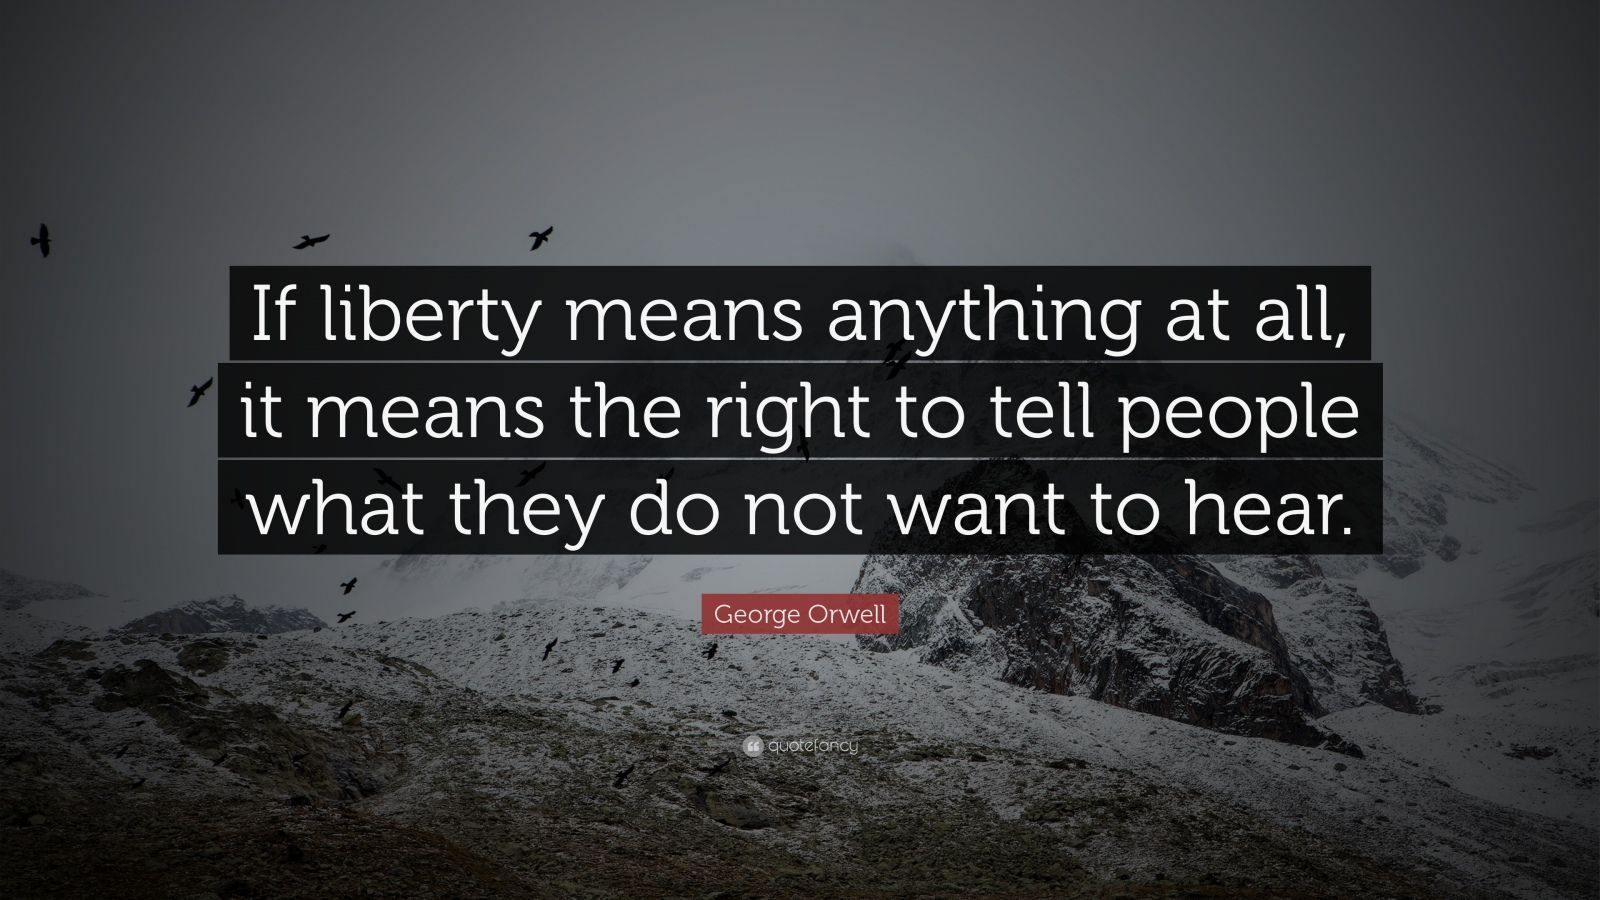 George Orwell Quote: “If liberty means .quotefancy.com